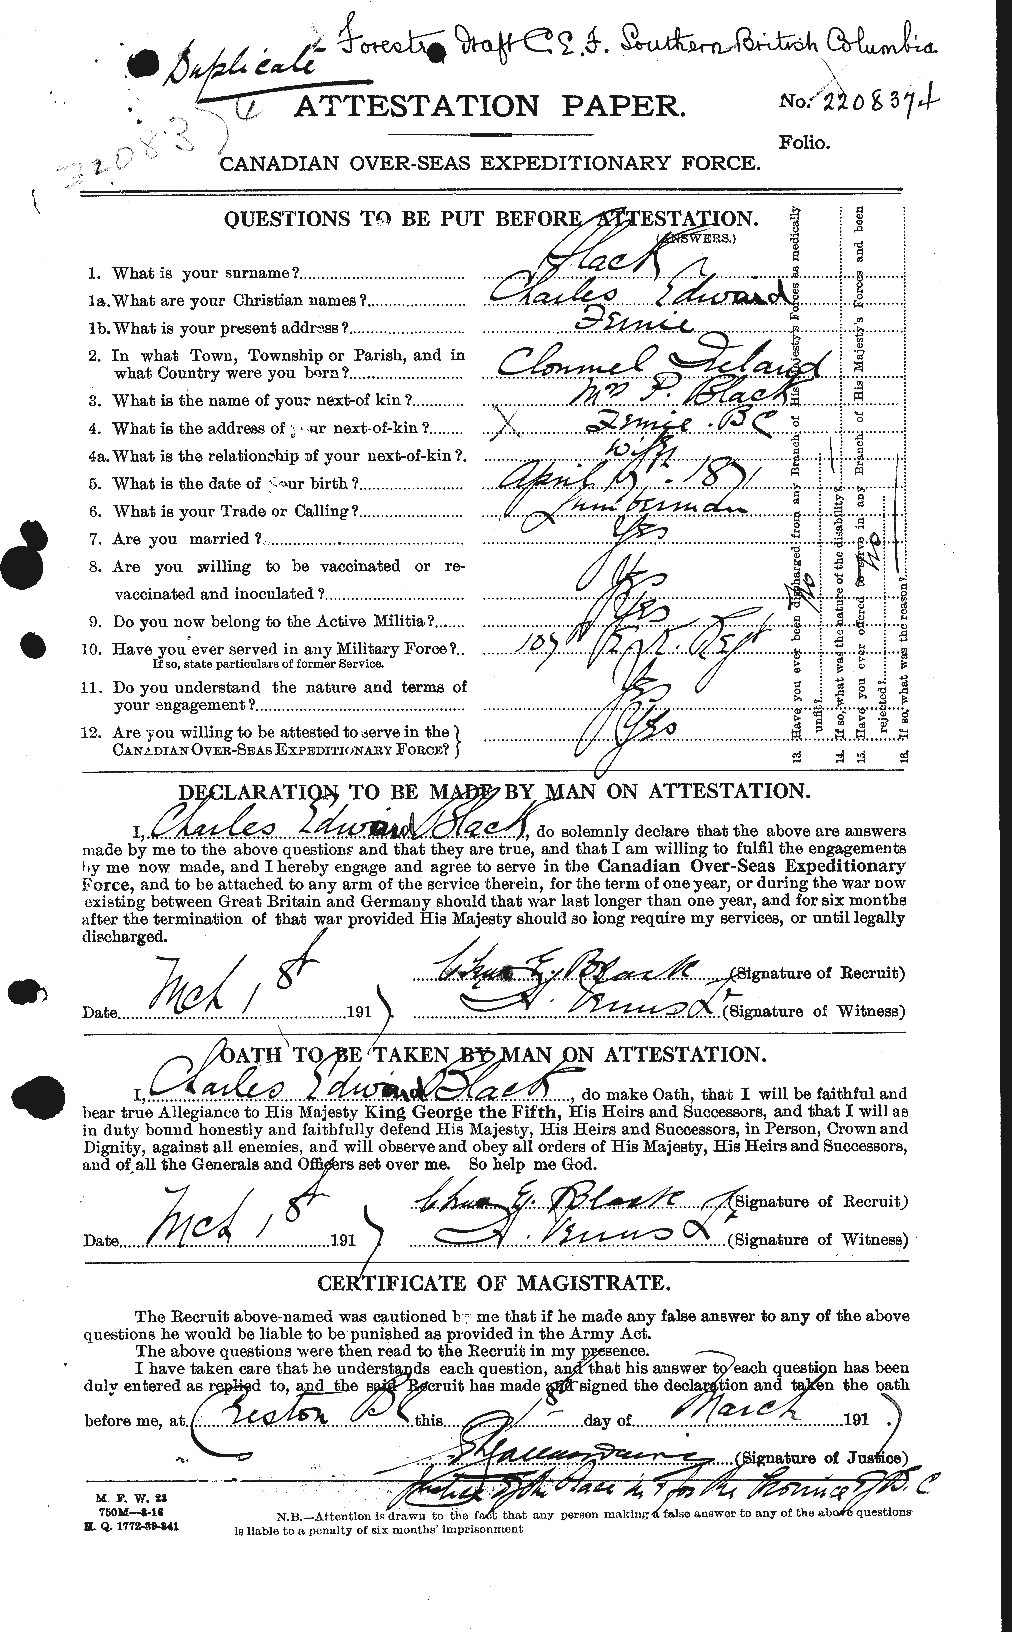 Personnel Records of the First World War - CEF 241238a